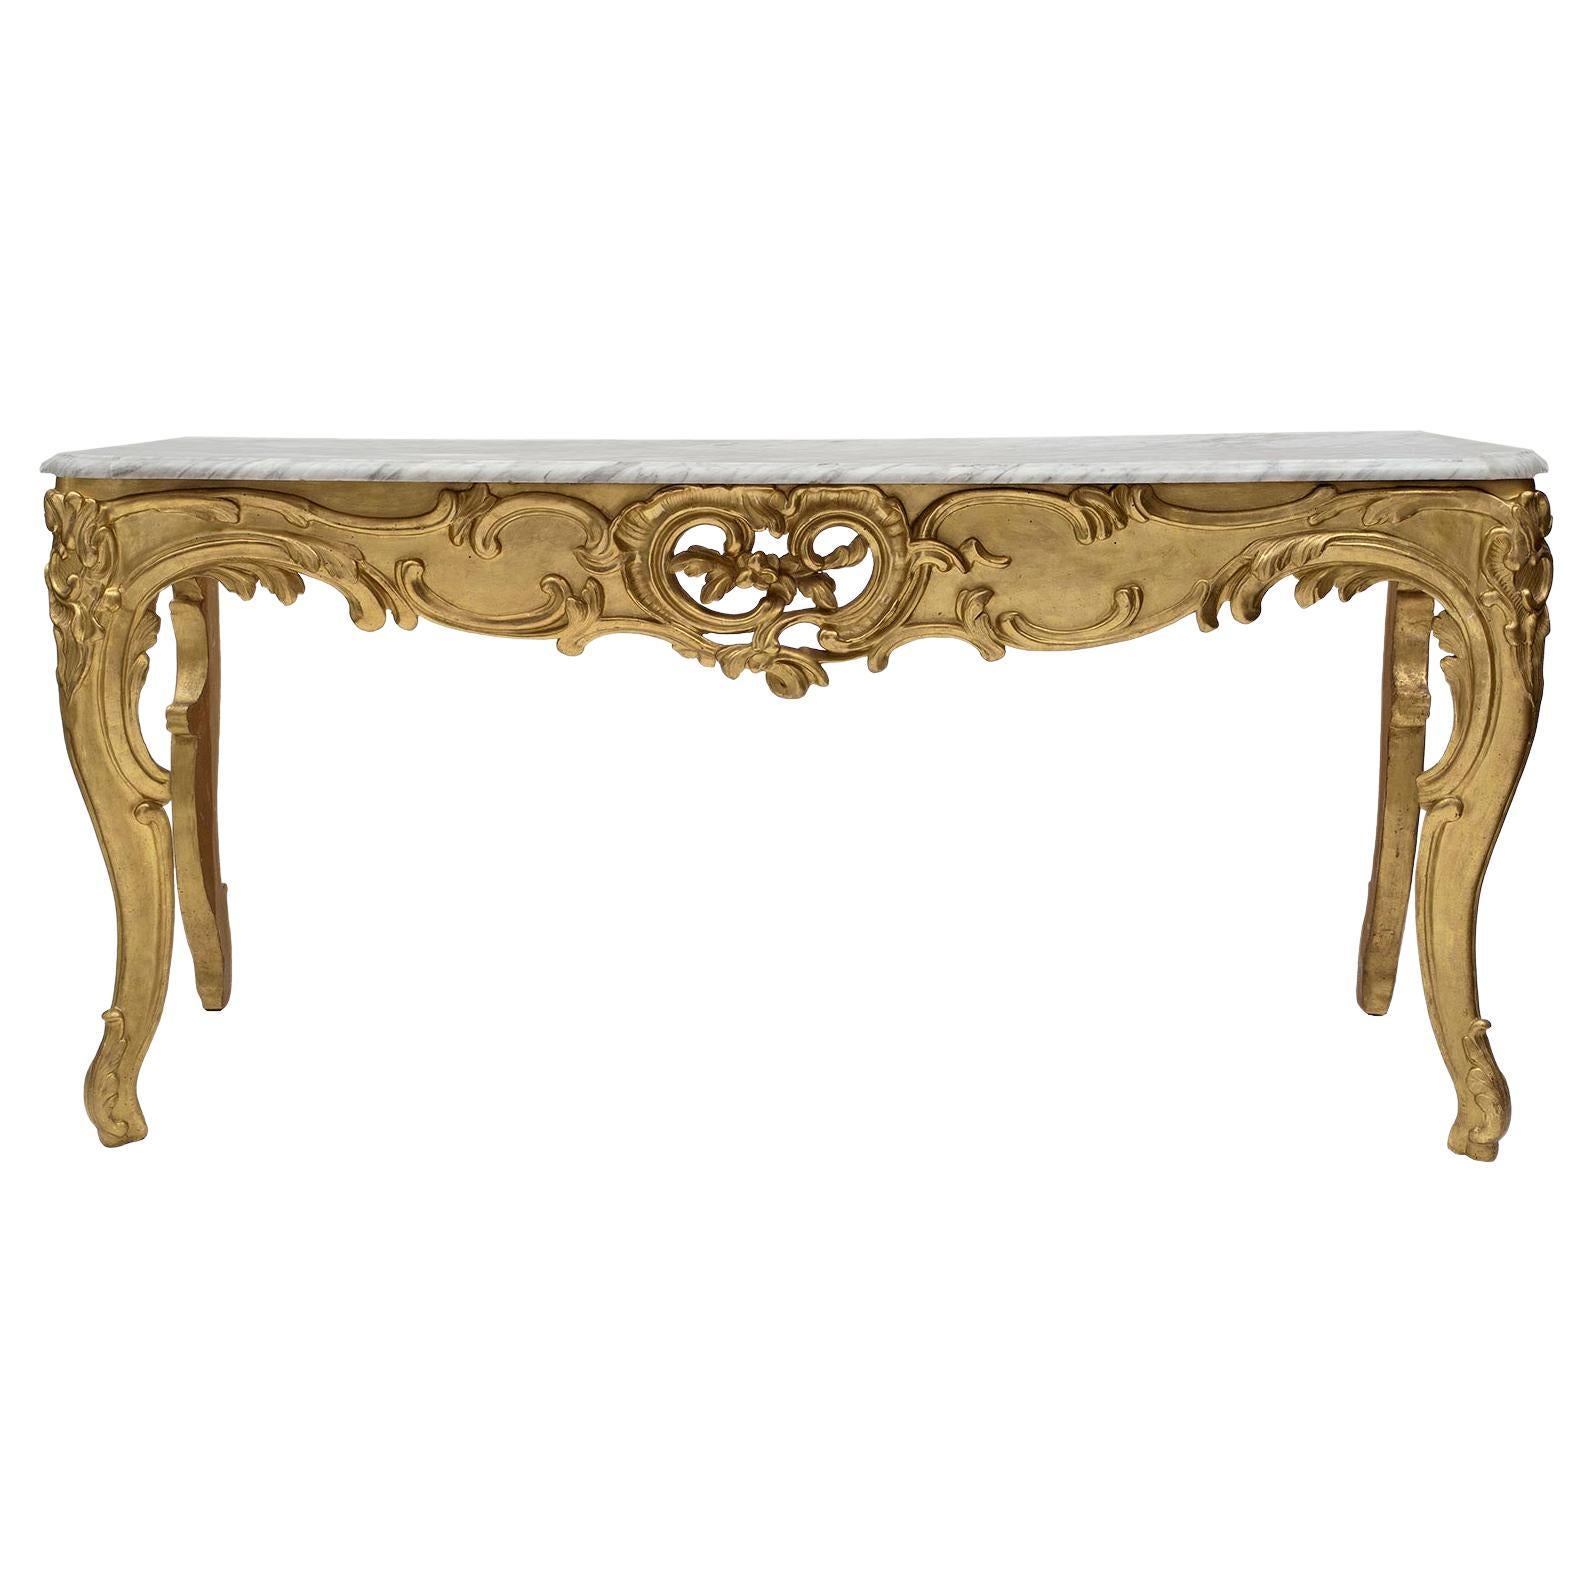 French 18th Century Régence Period Giltwood and Marble Console For Sale